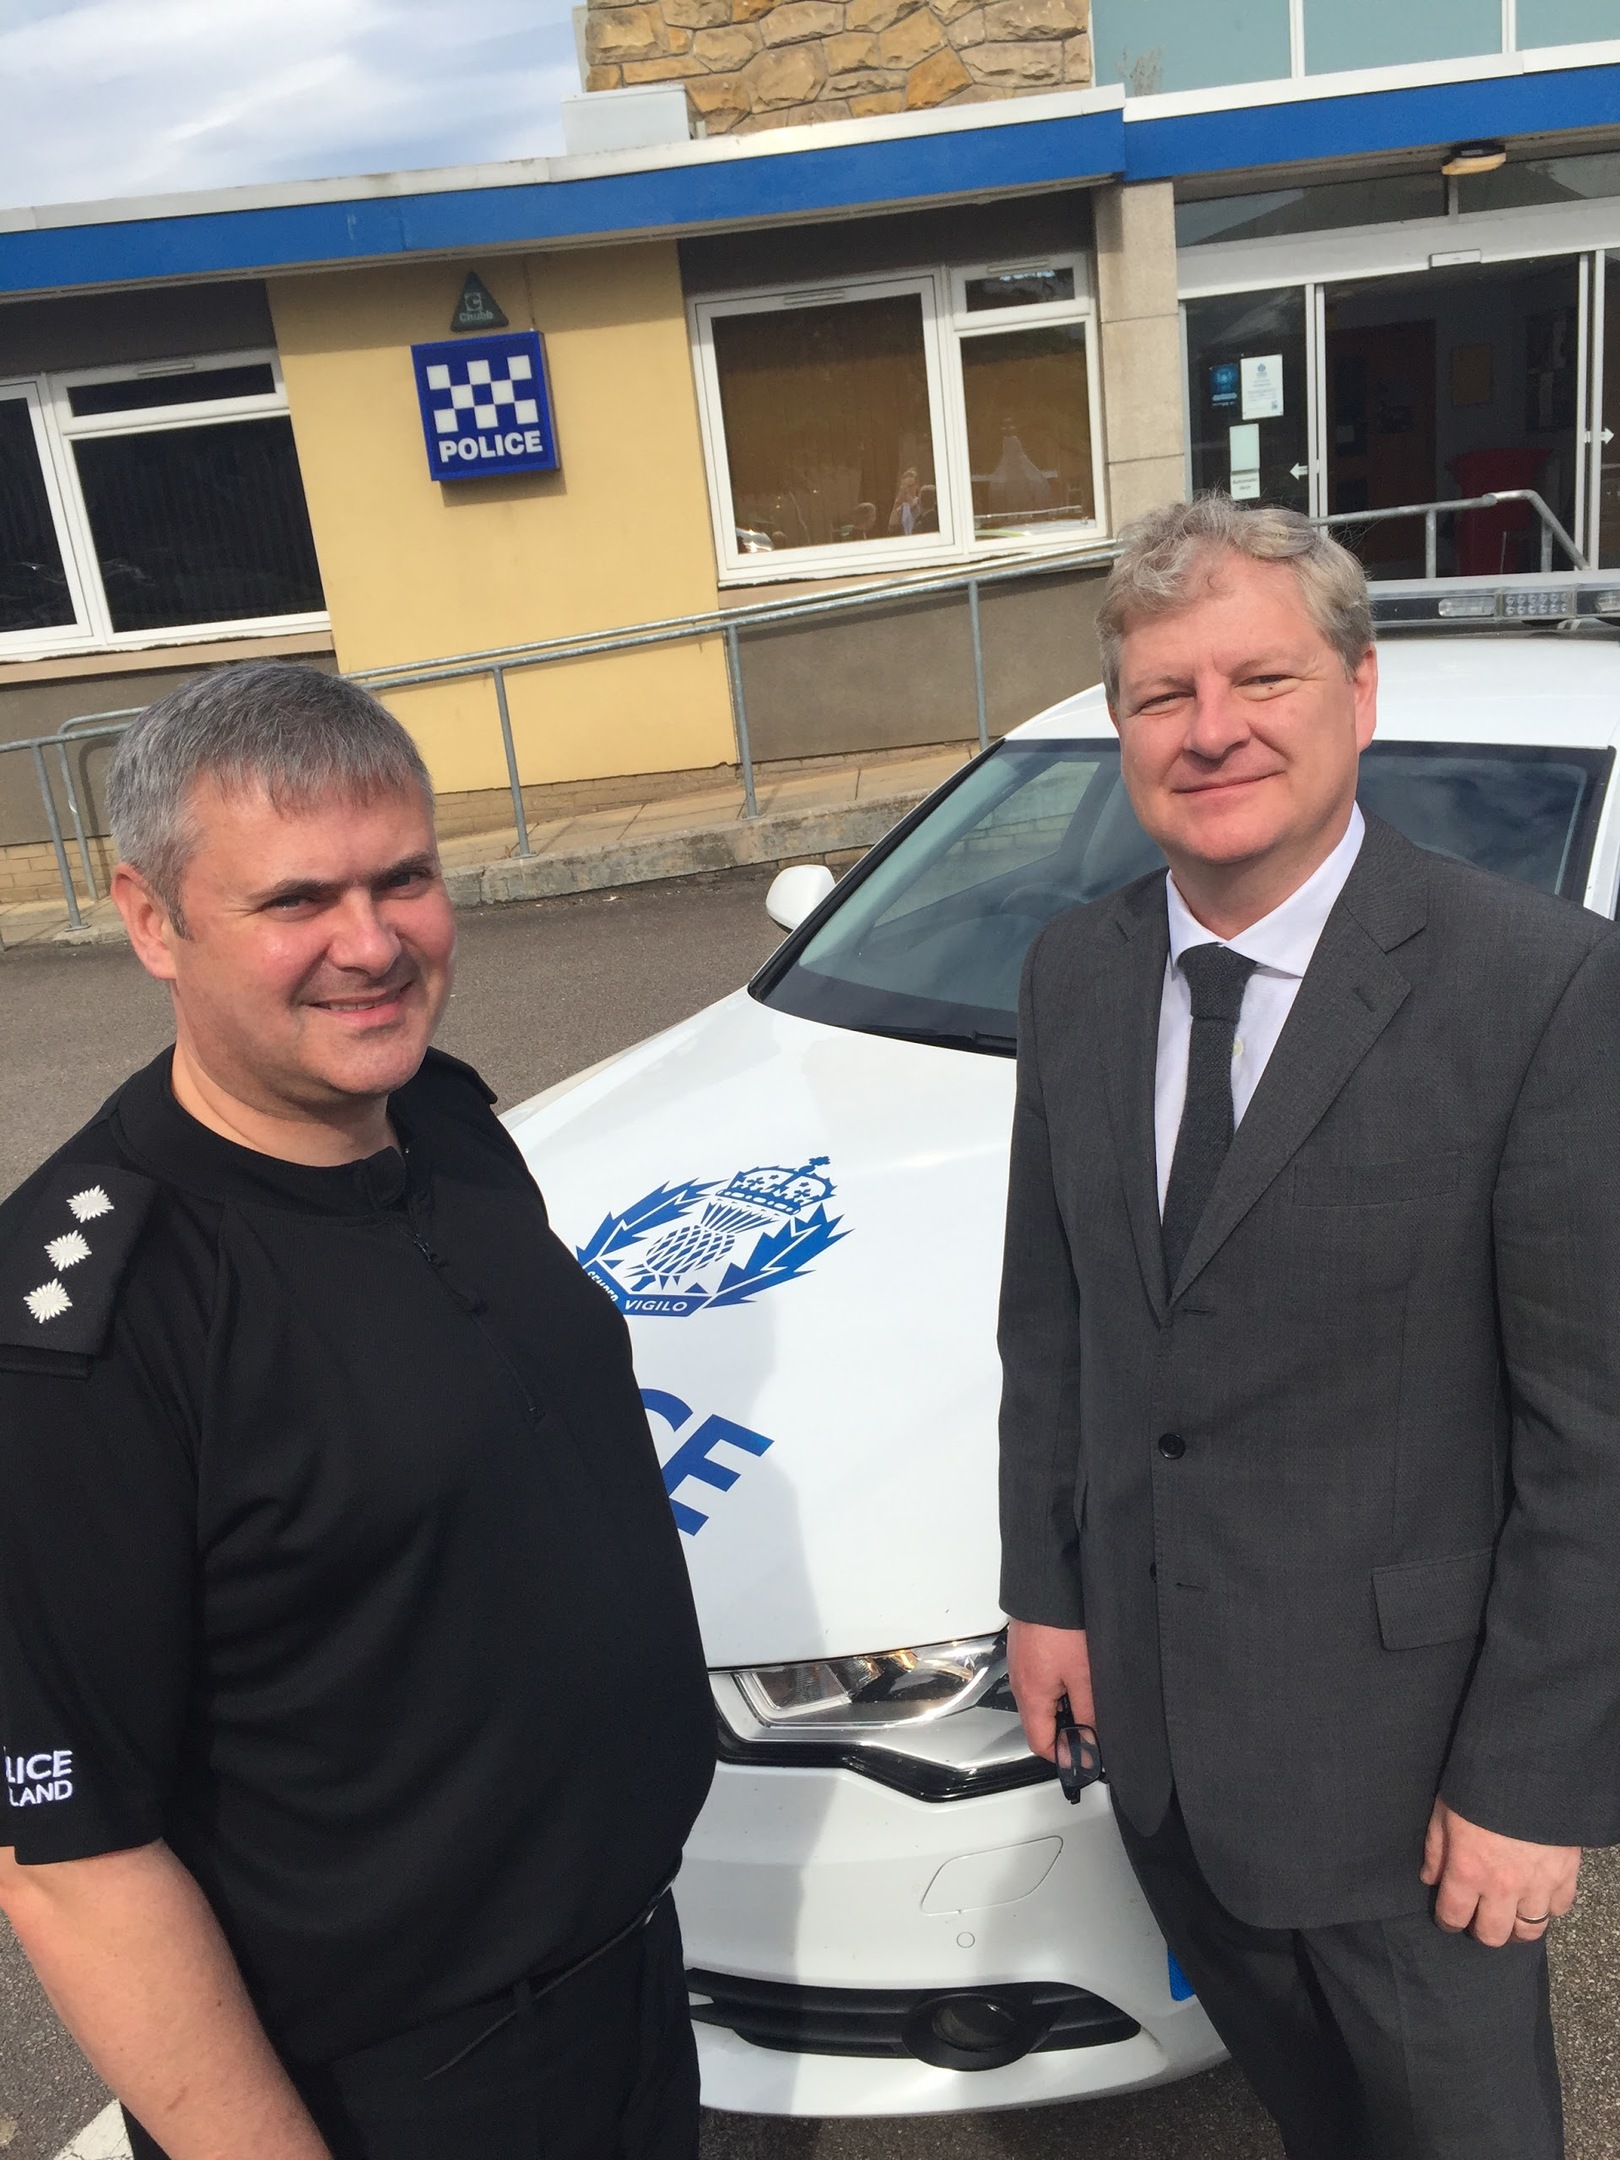 Chief Inspector Stewart Mackie and Angus Robertson outside Elgin Police Station.